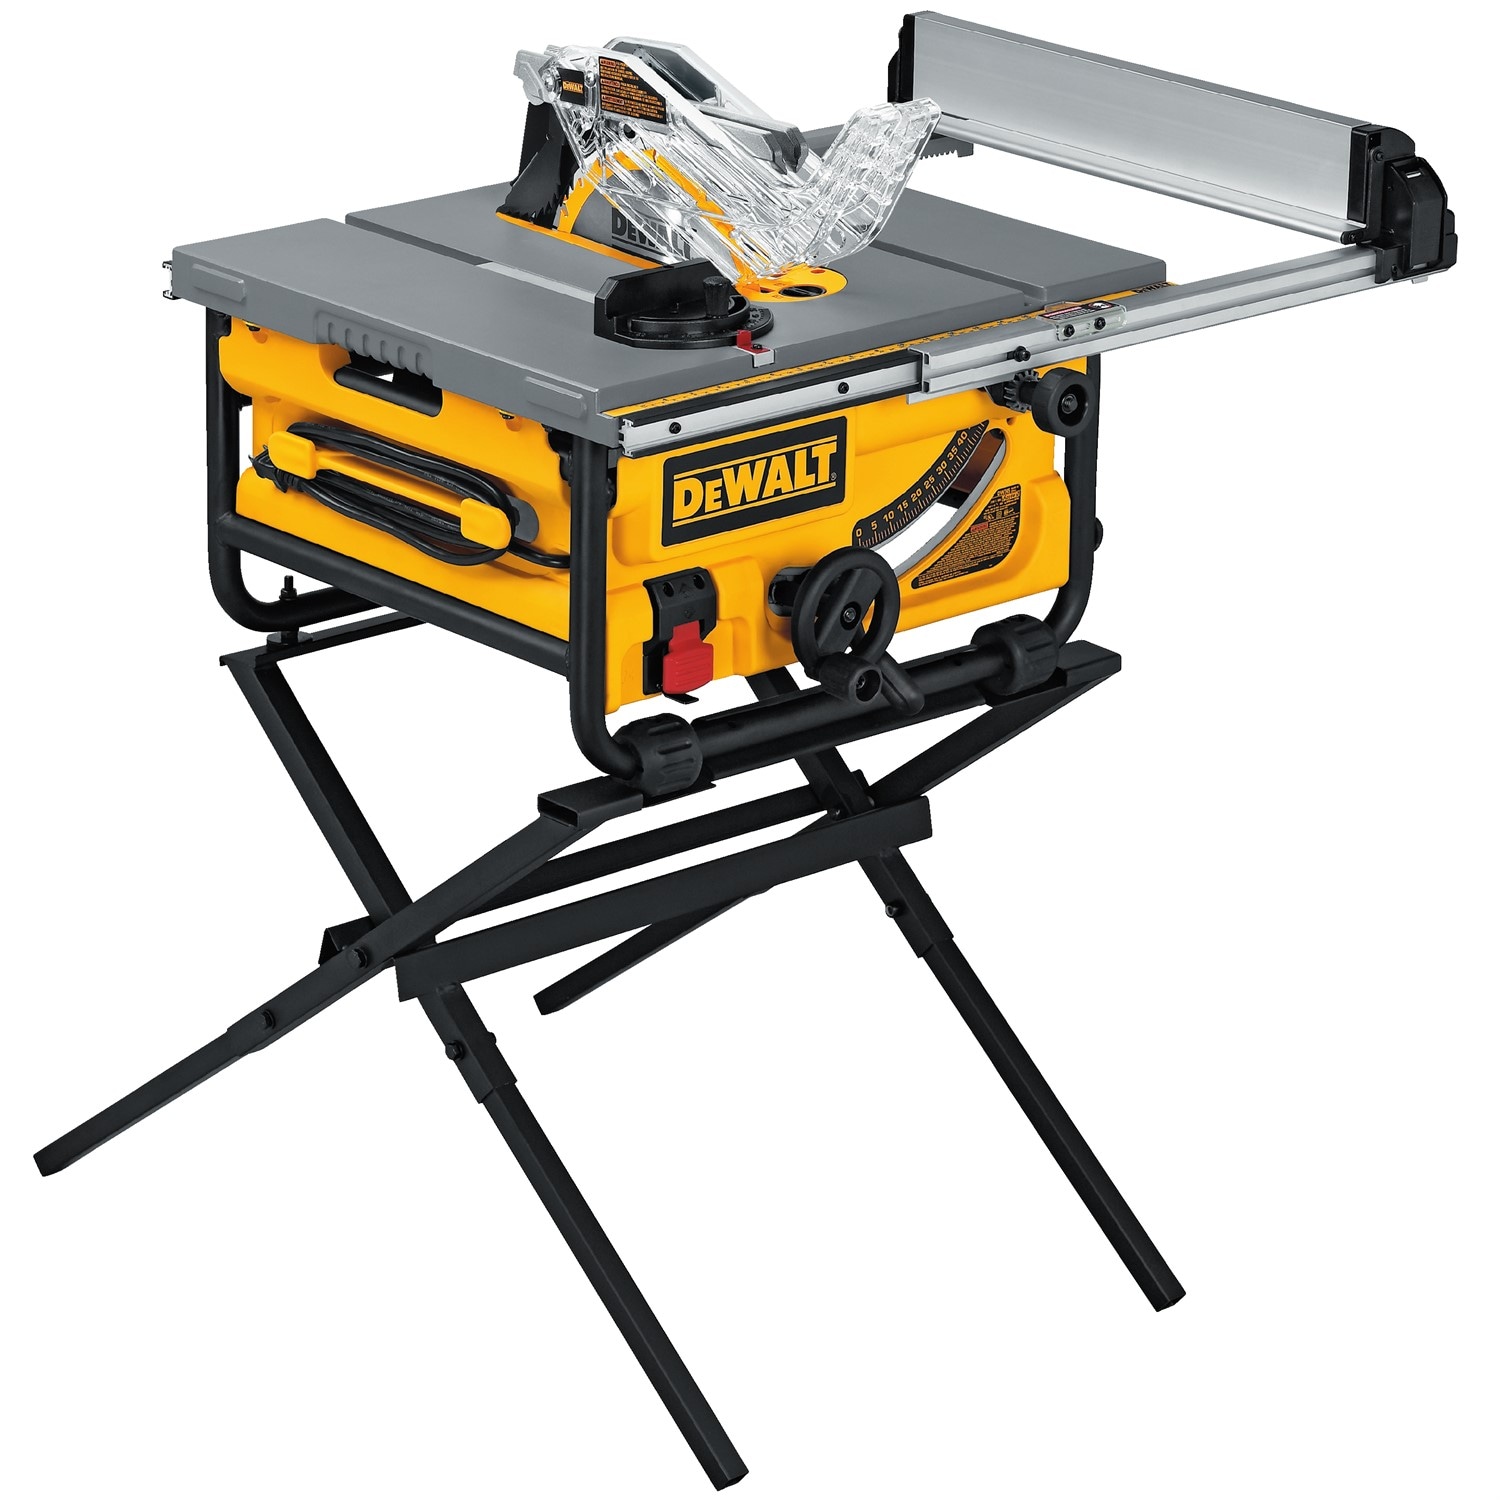 DEWALT 10-in 15-Amp Portable Benchtop Table Saw with Stand in Table Saws department at Lowes.com